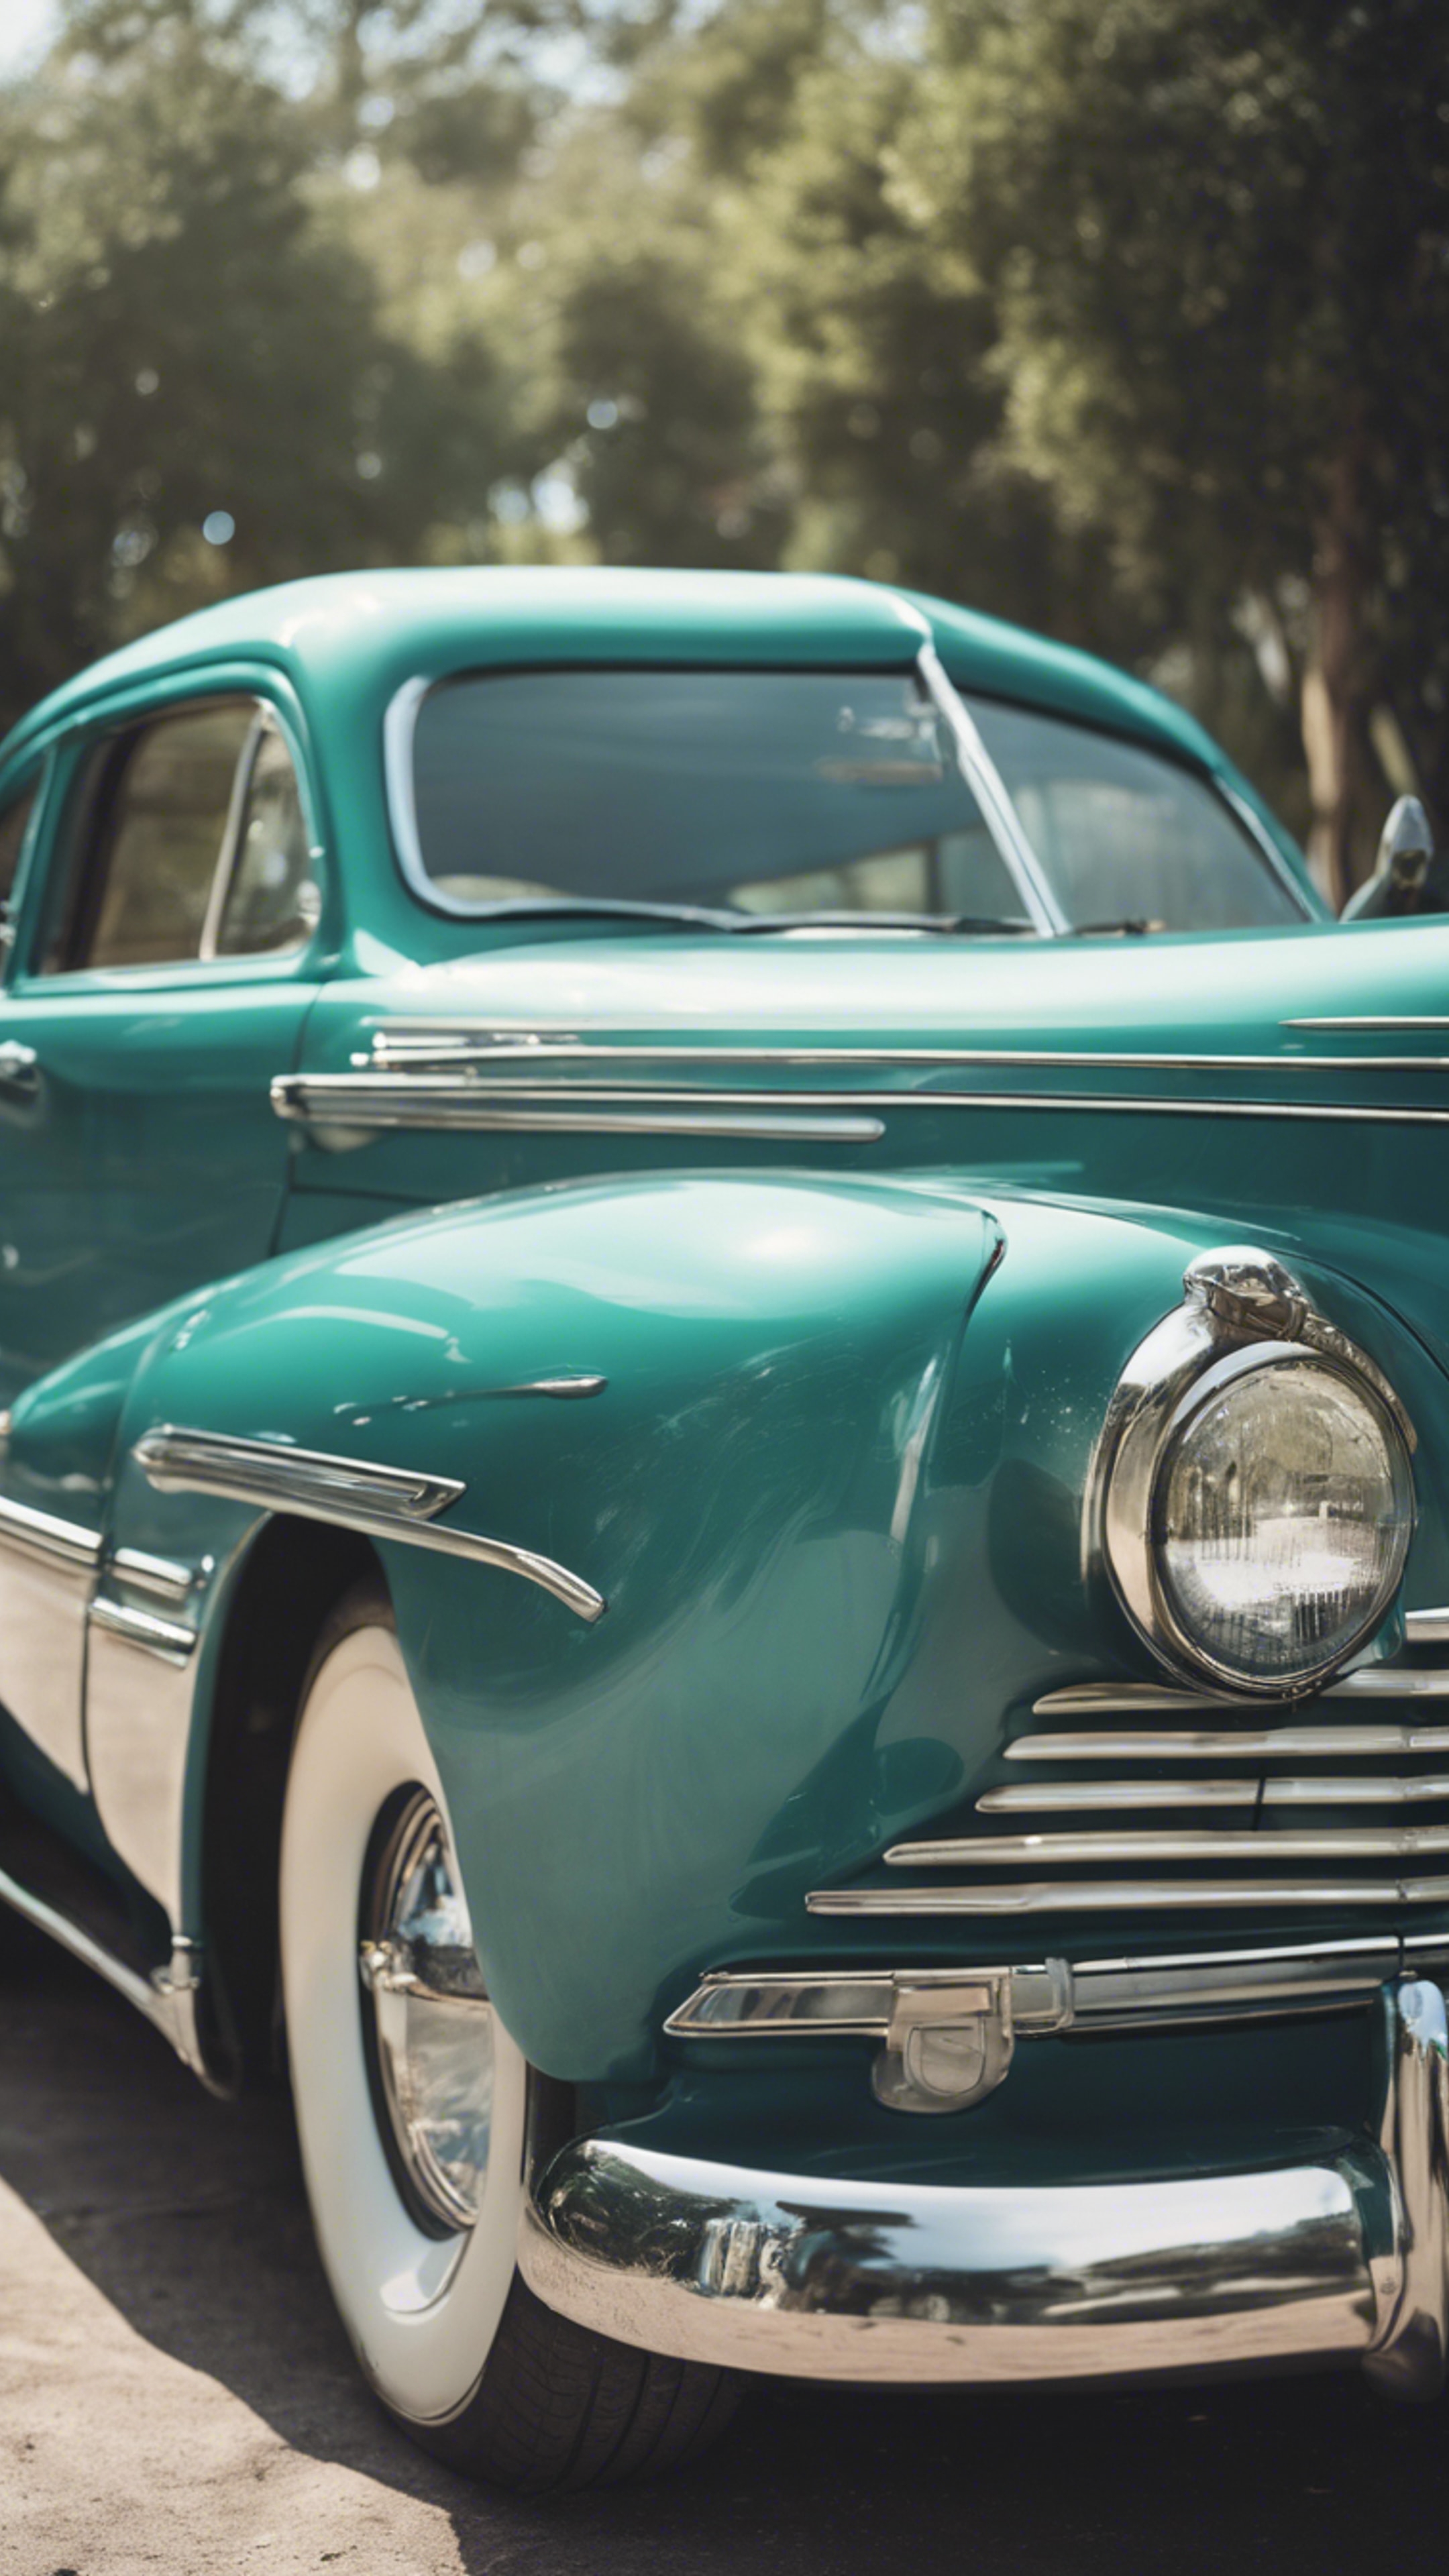 A vintage automobile polished in a cool teal color. Wallpaper[a65c55f132fb459cb8fd]